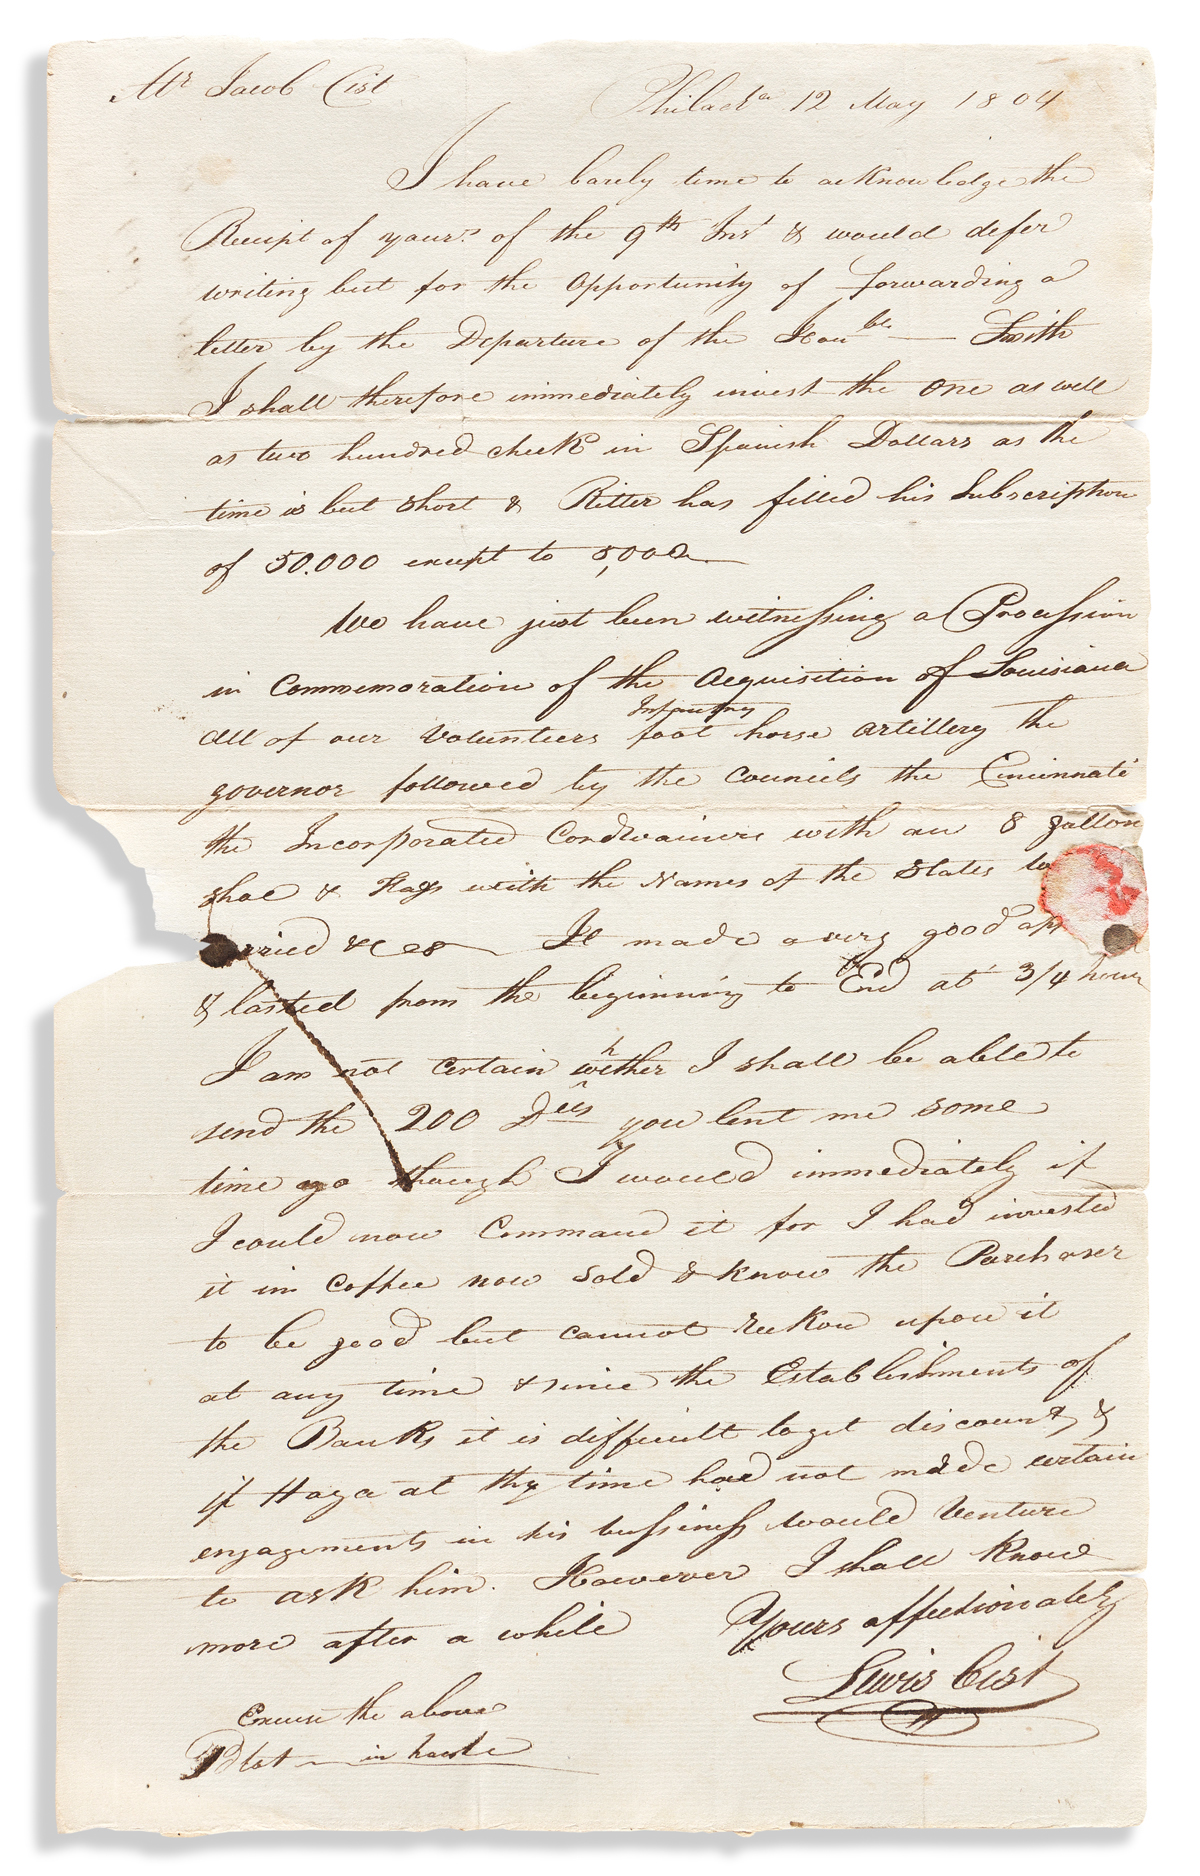 (LOUISIANA PURCHASE.) Lewis Cist. Letter describing a procession in honor of the Louisiana Purchase.